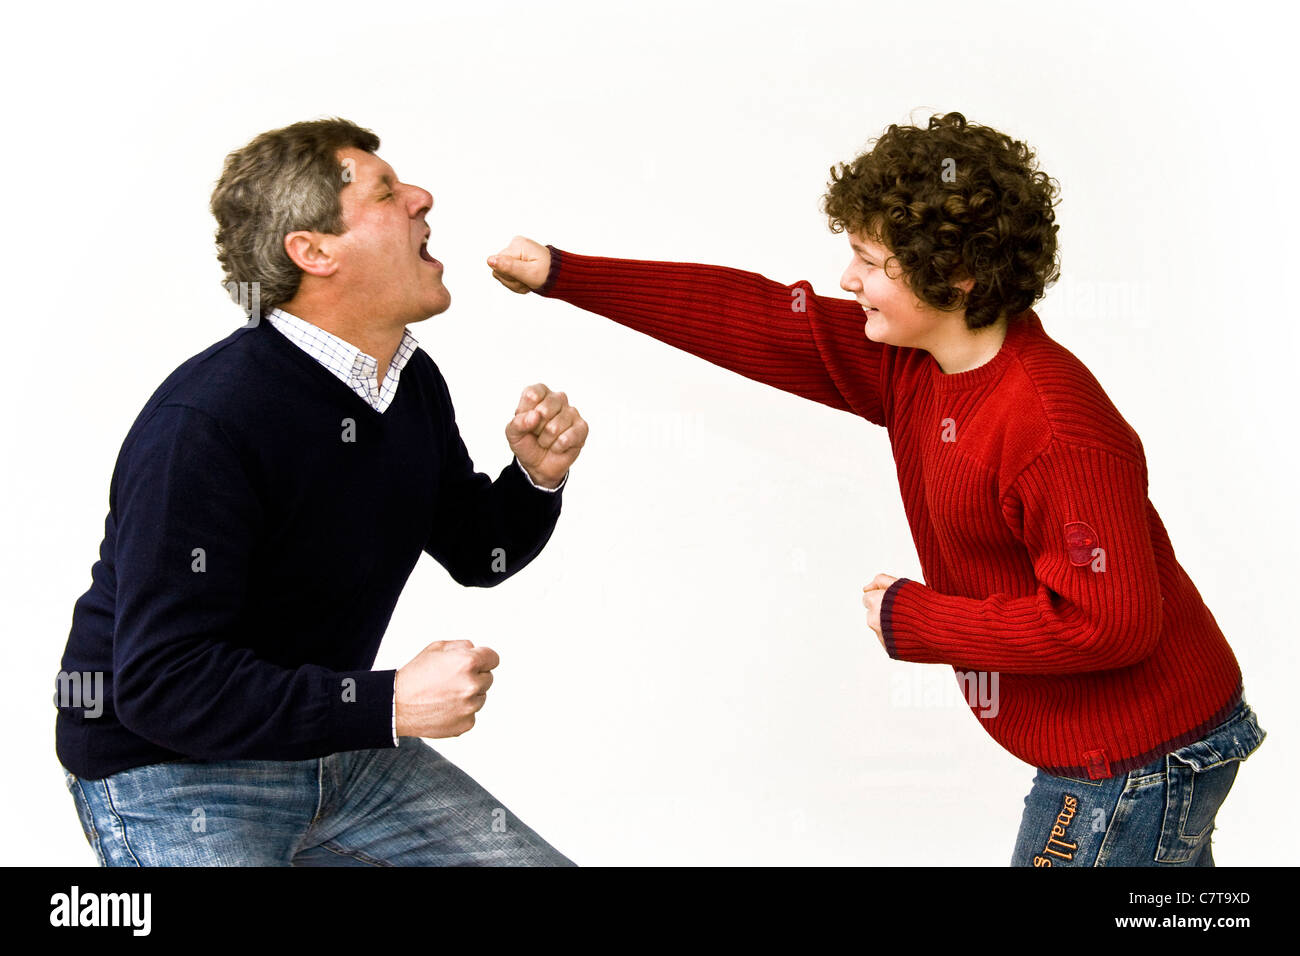 Father and son playing boxe Stock Photo